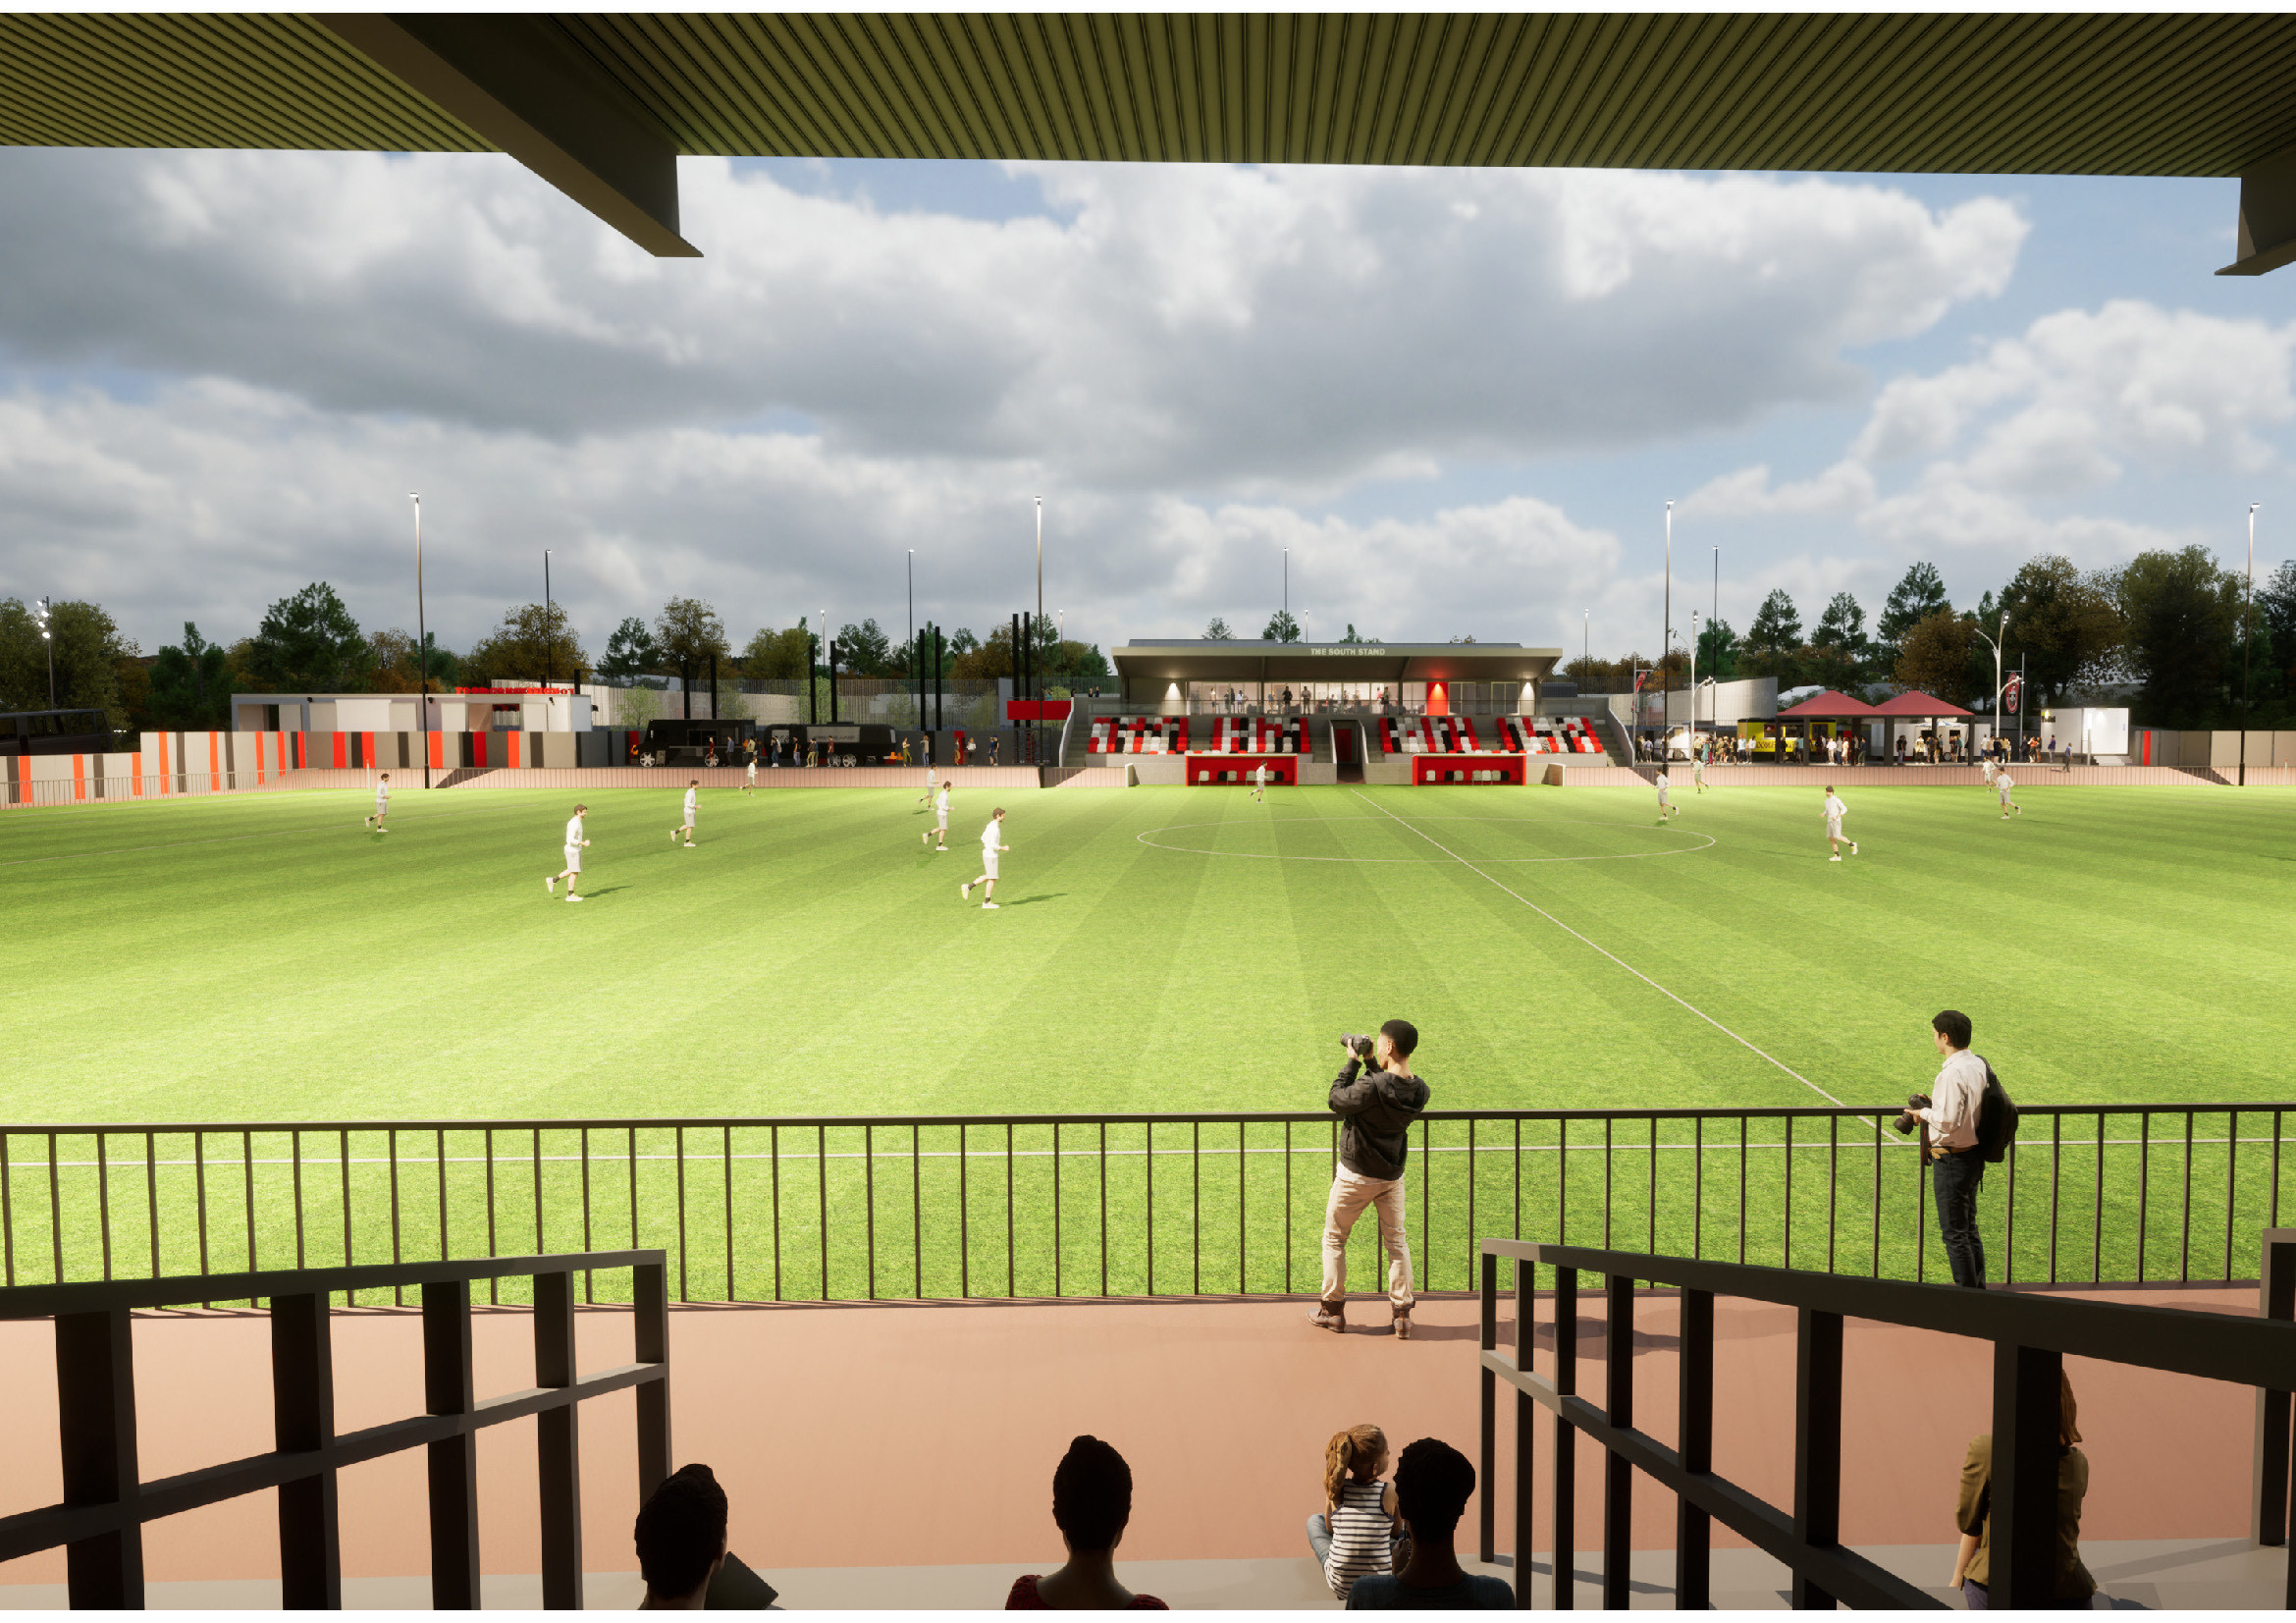 A proposed view onto one of the pitches Image: Truro City FC